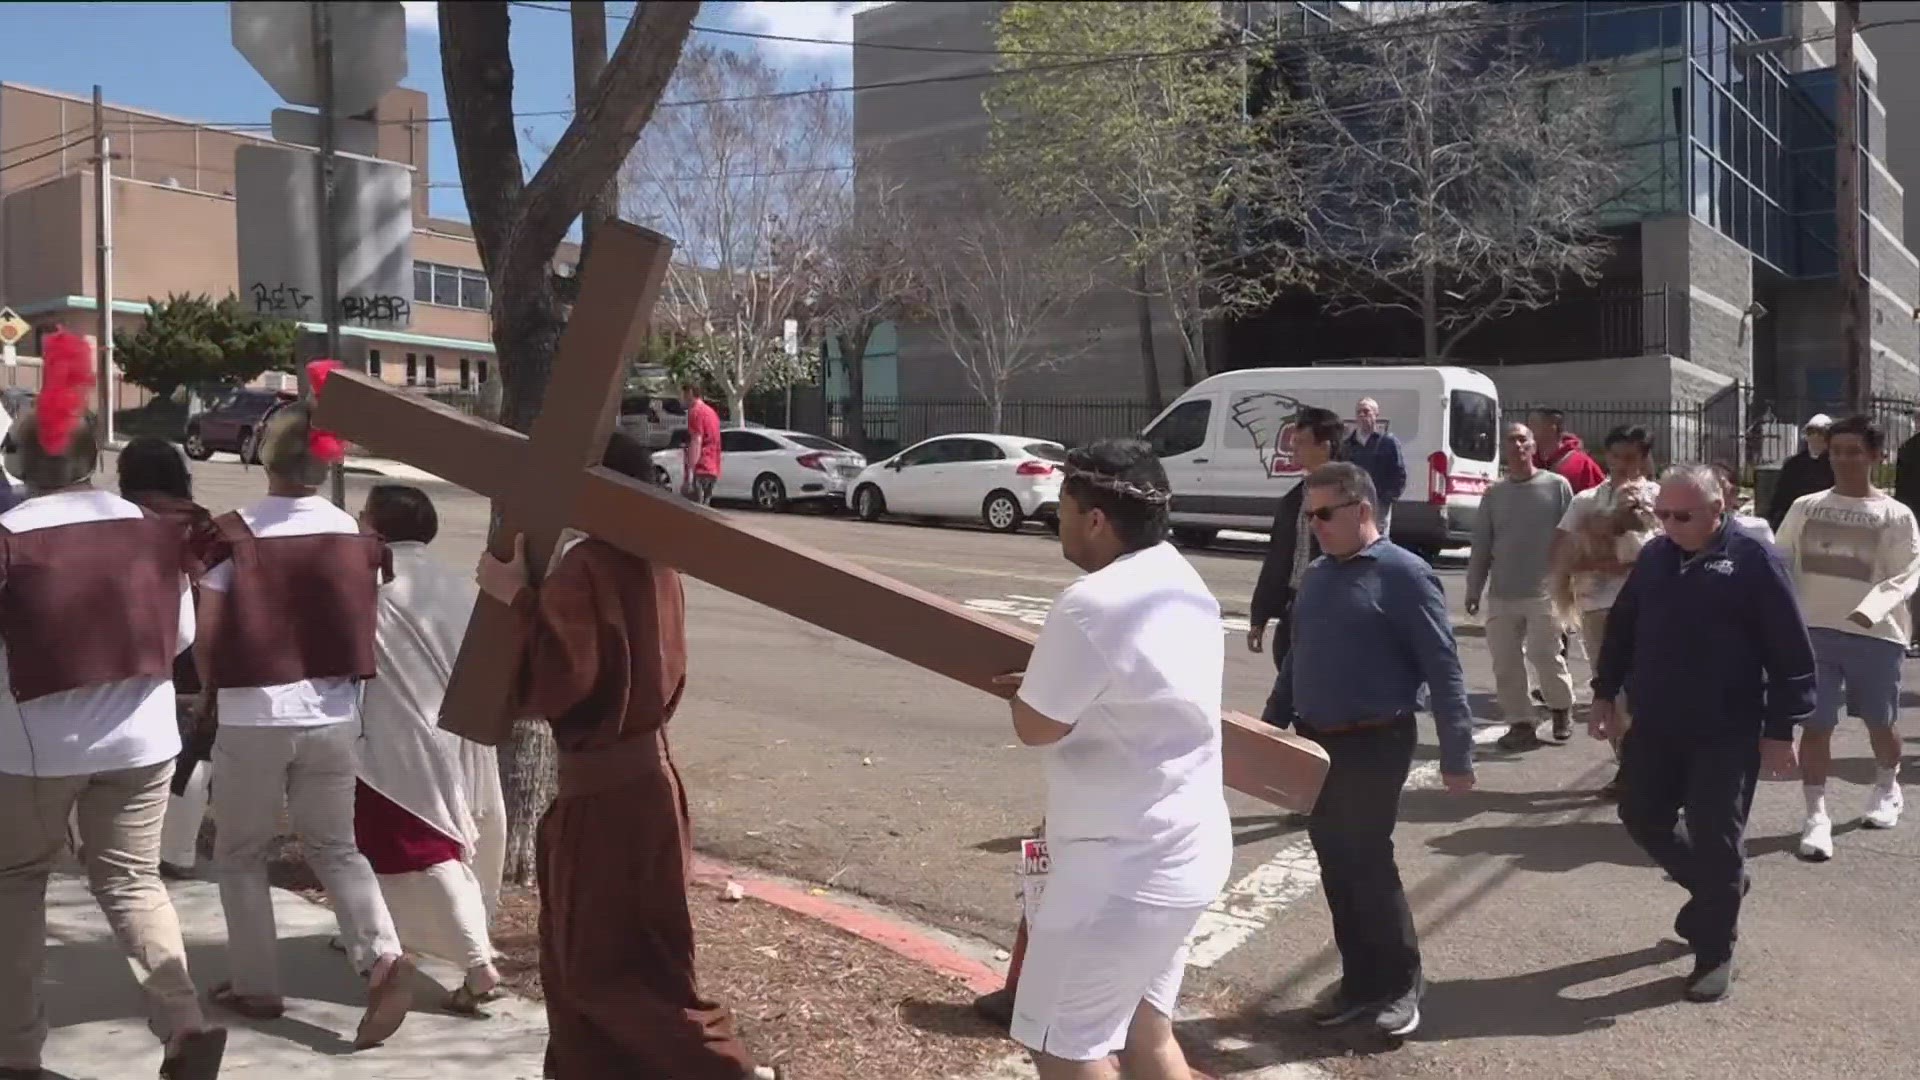 Good Friday marked the 31st annual Walk for the Suffering.